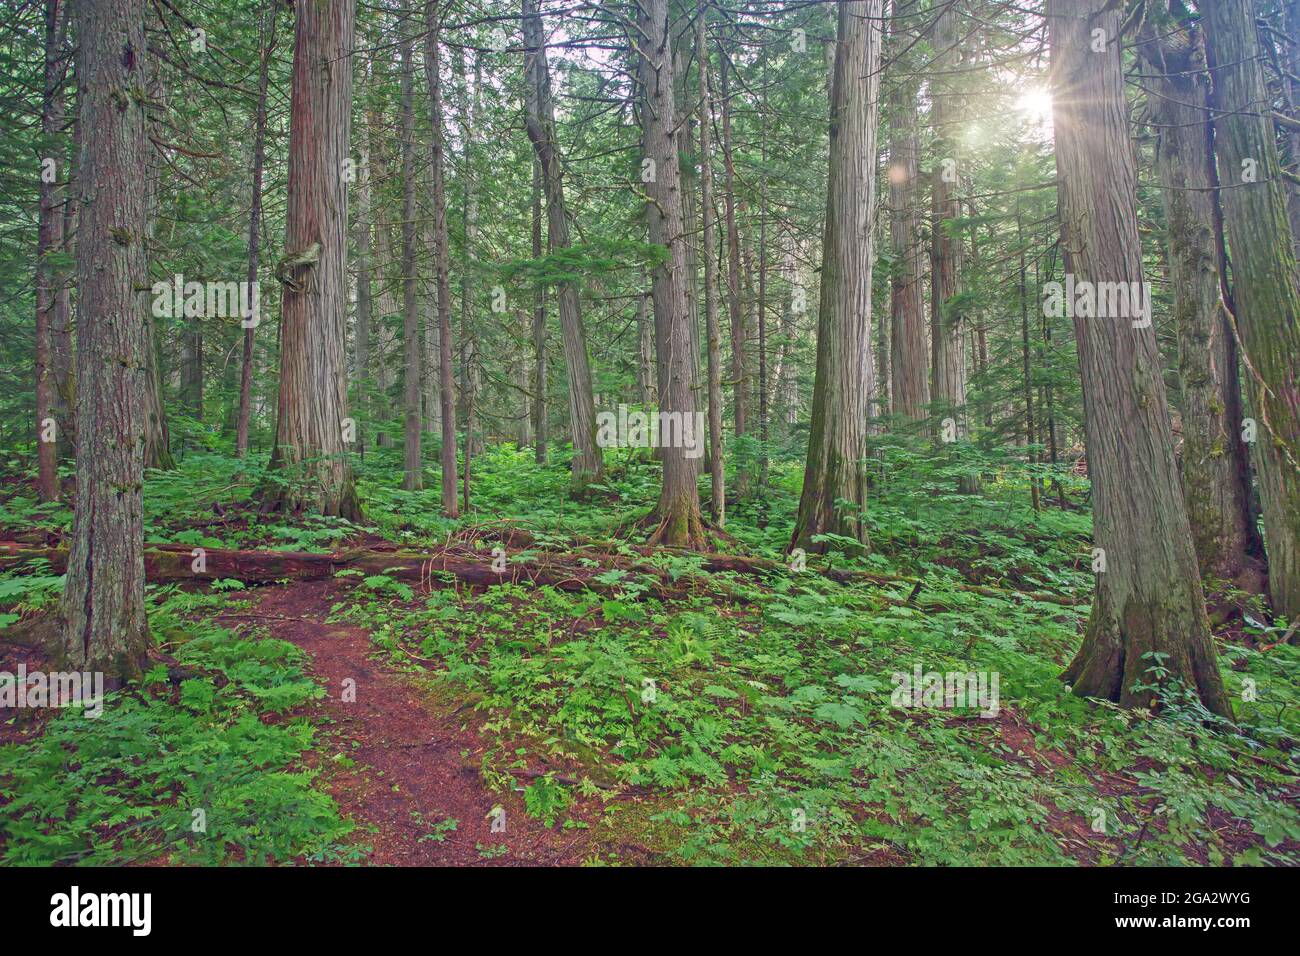 Lush forest with the sun shining through the trees on the West coast of Canada; British Columbia, Canada Stock Photo